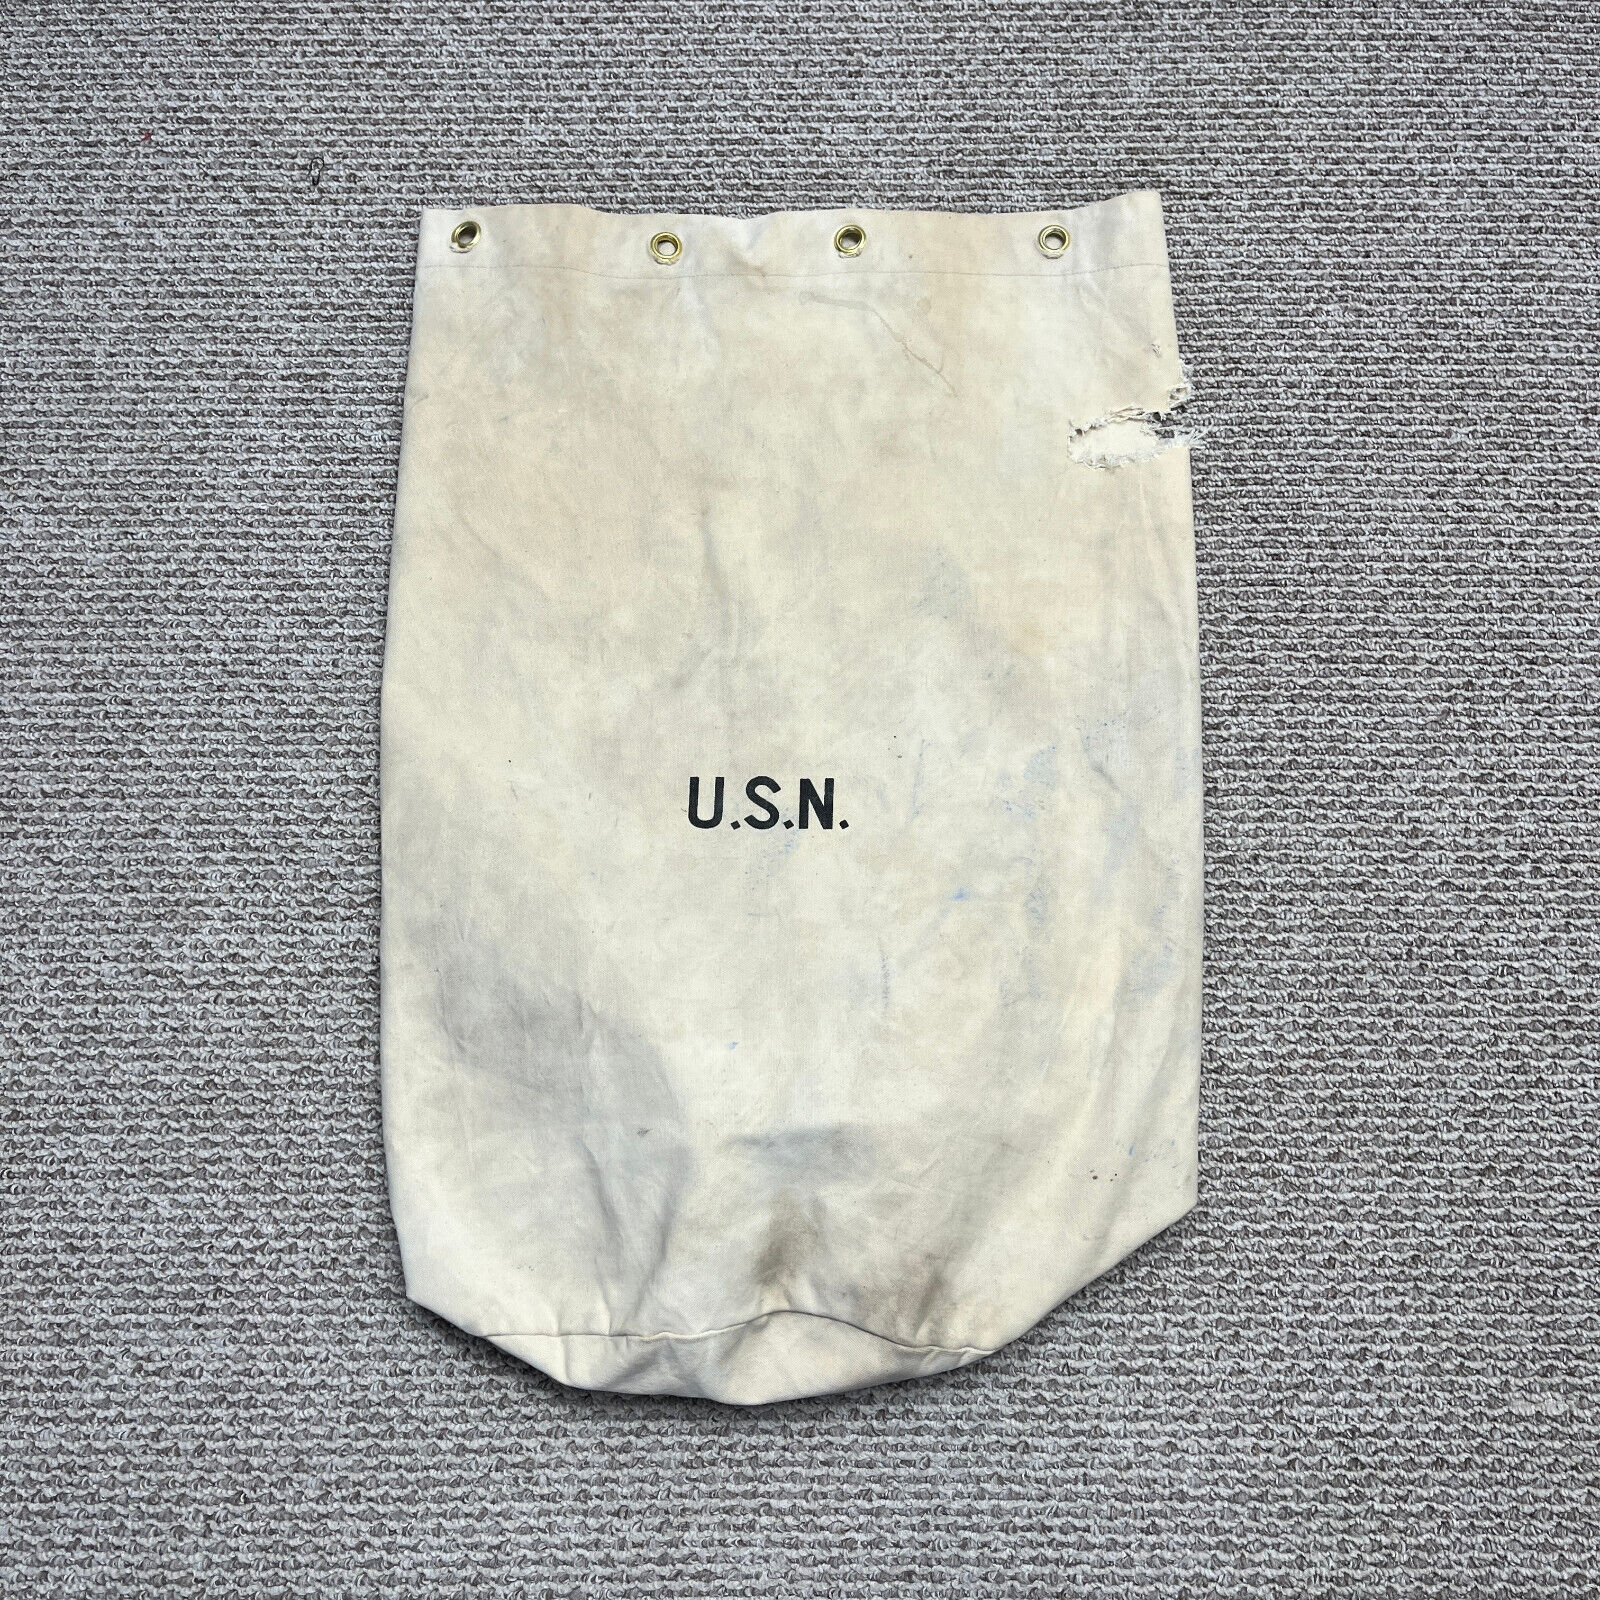 Vintage USN Duffle Bag White Cotton Canvas Stenciled Ruck Sack Holes Flaws